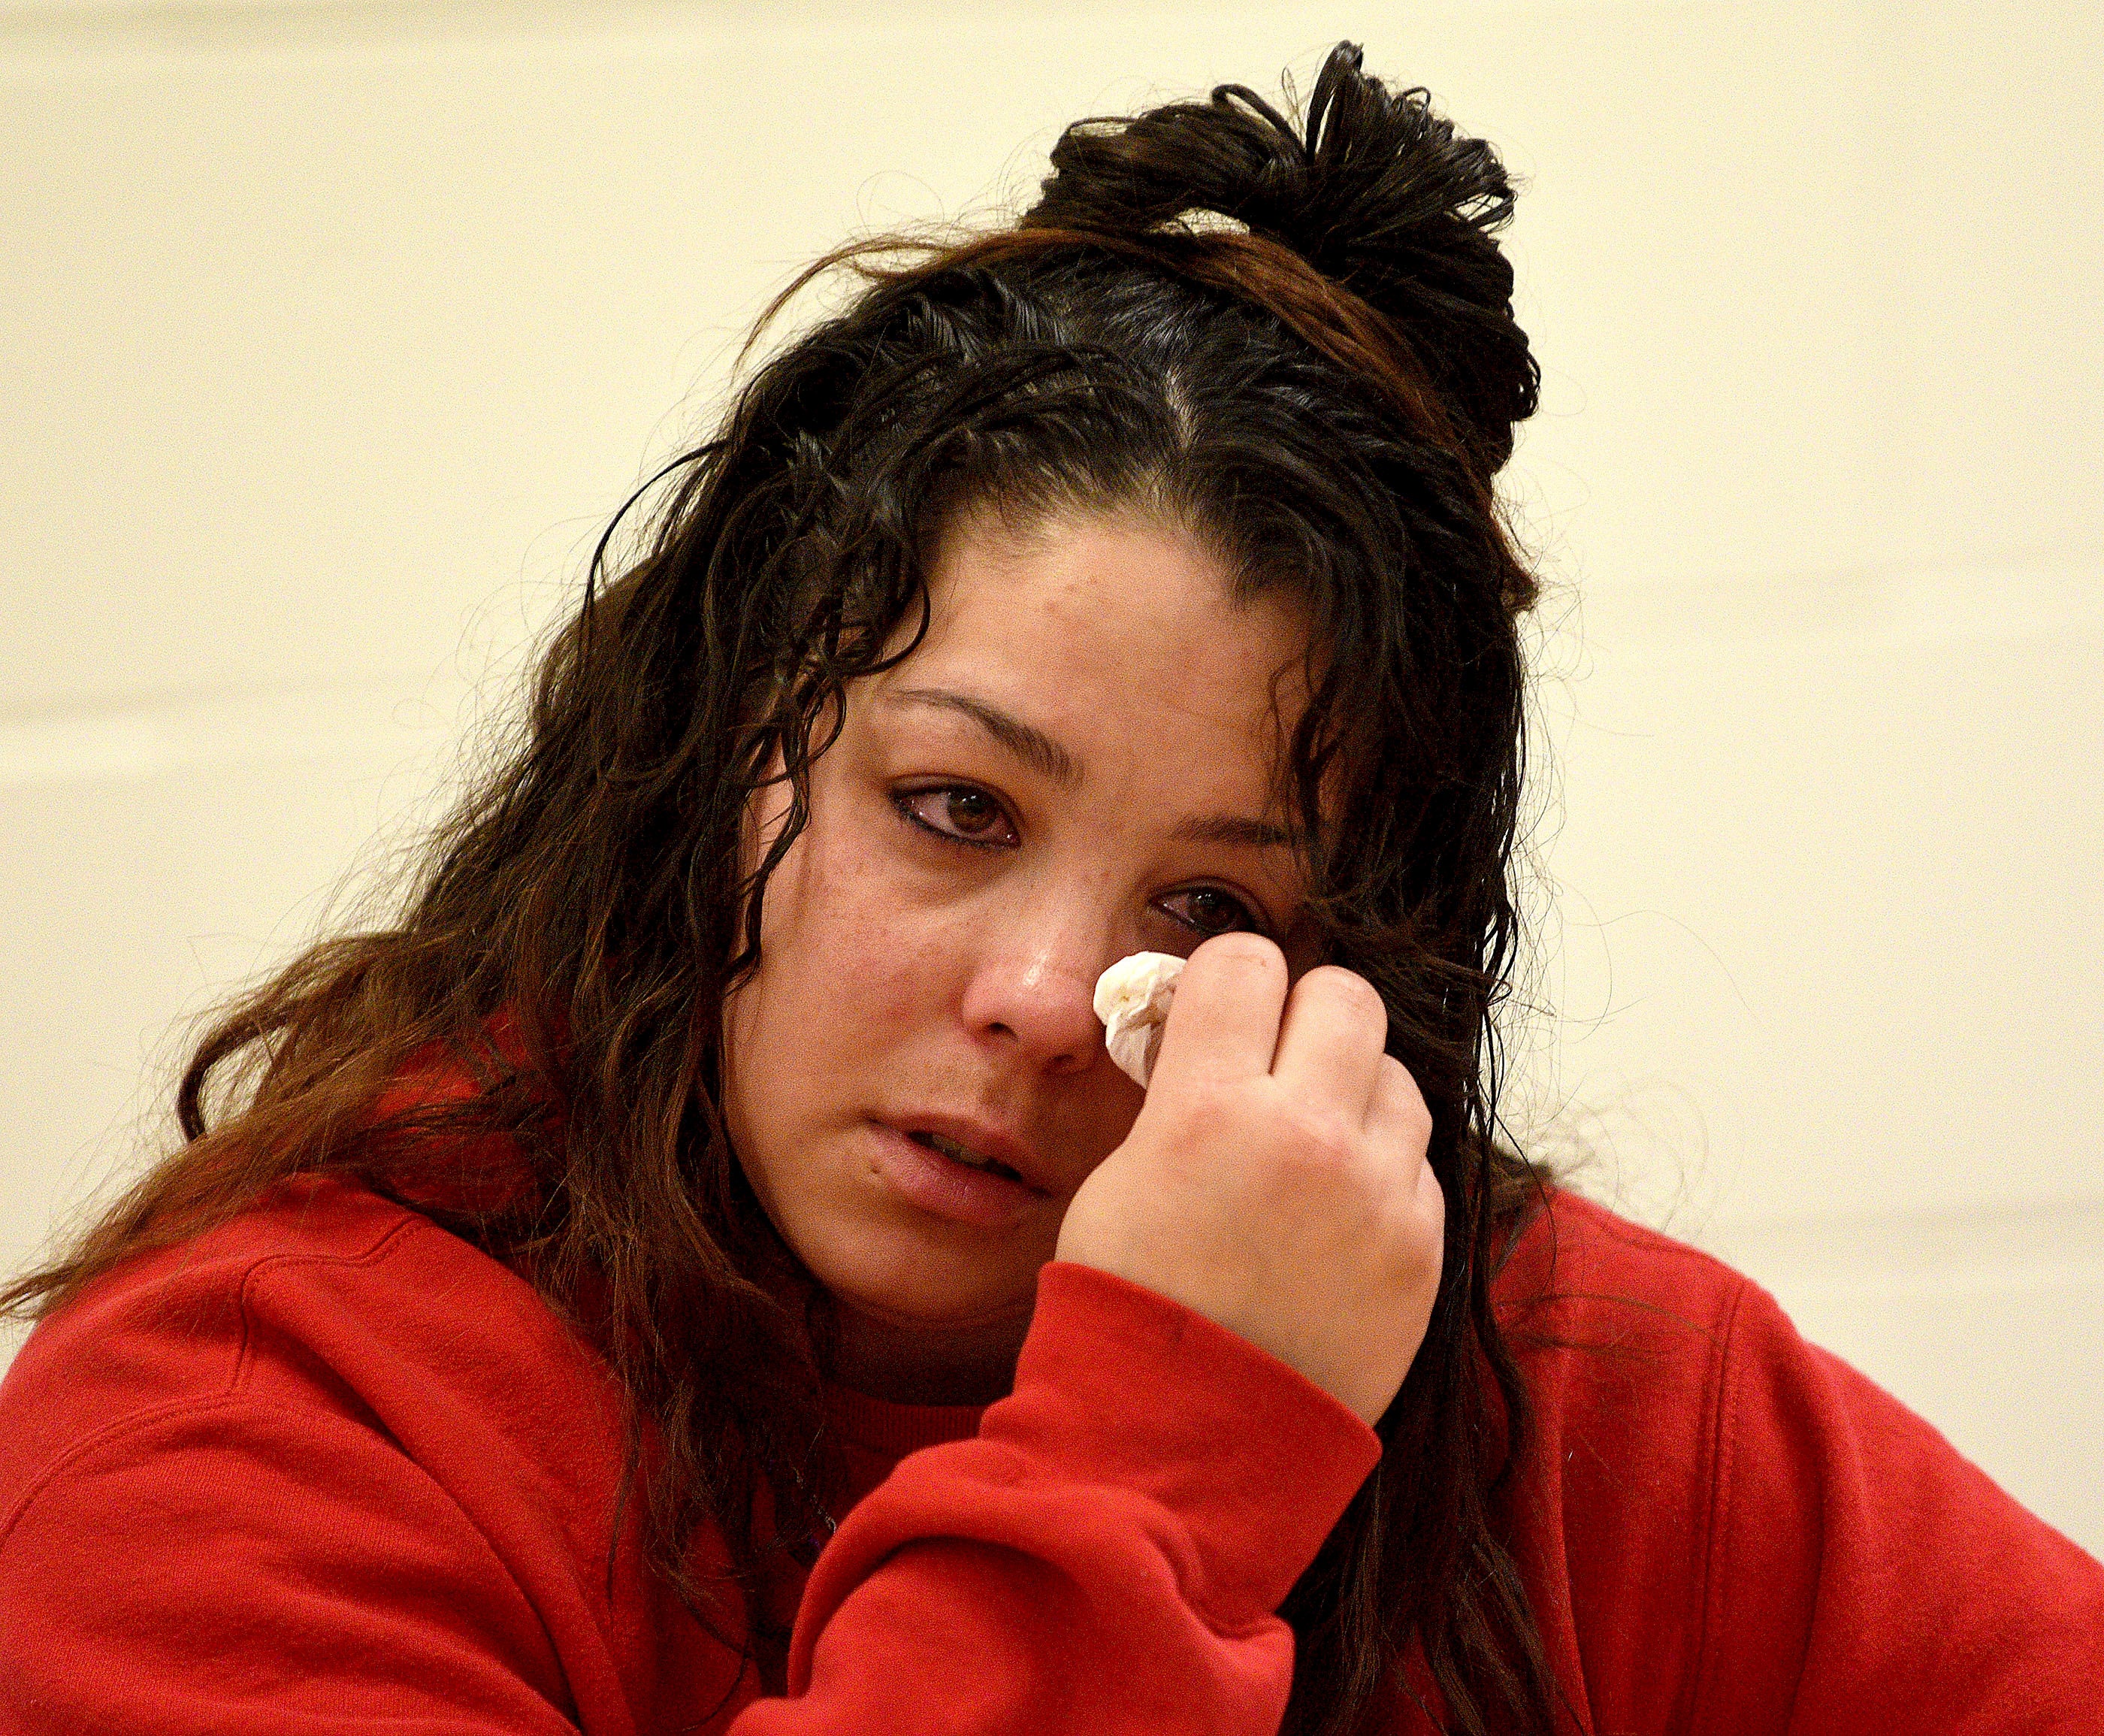 Kayla Montgomery wipes away tears during questioning from the parole board on March 7